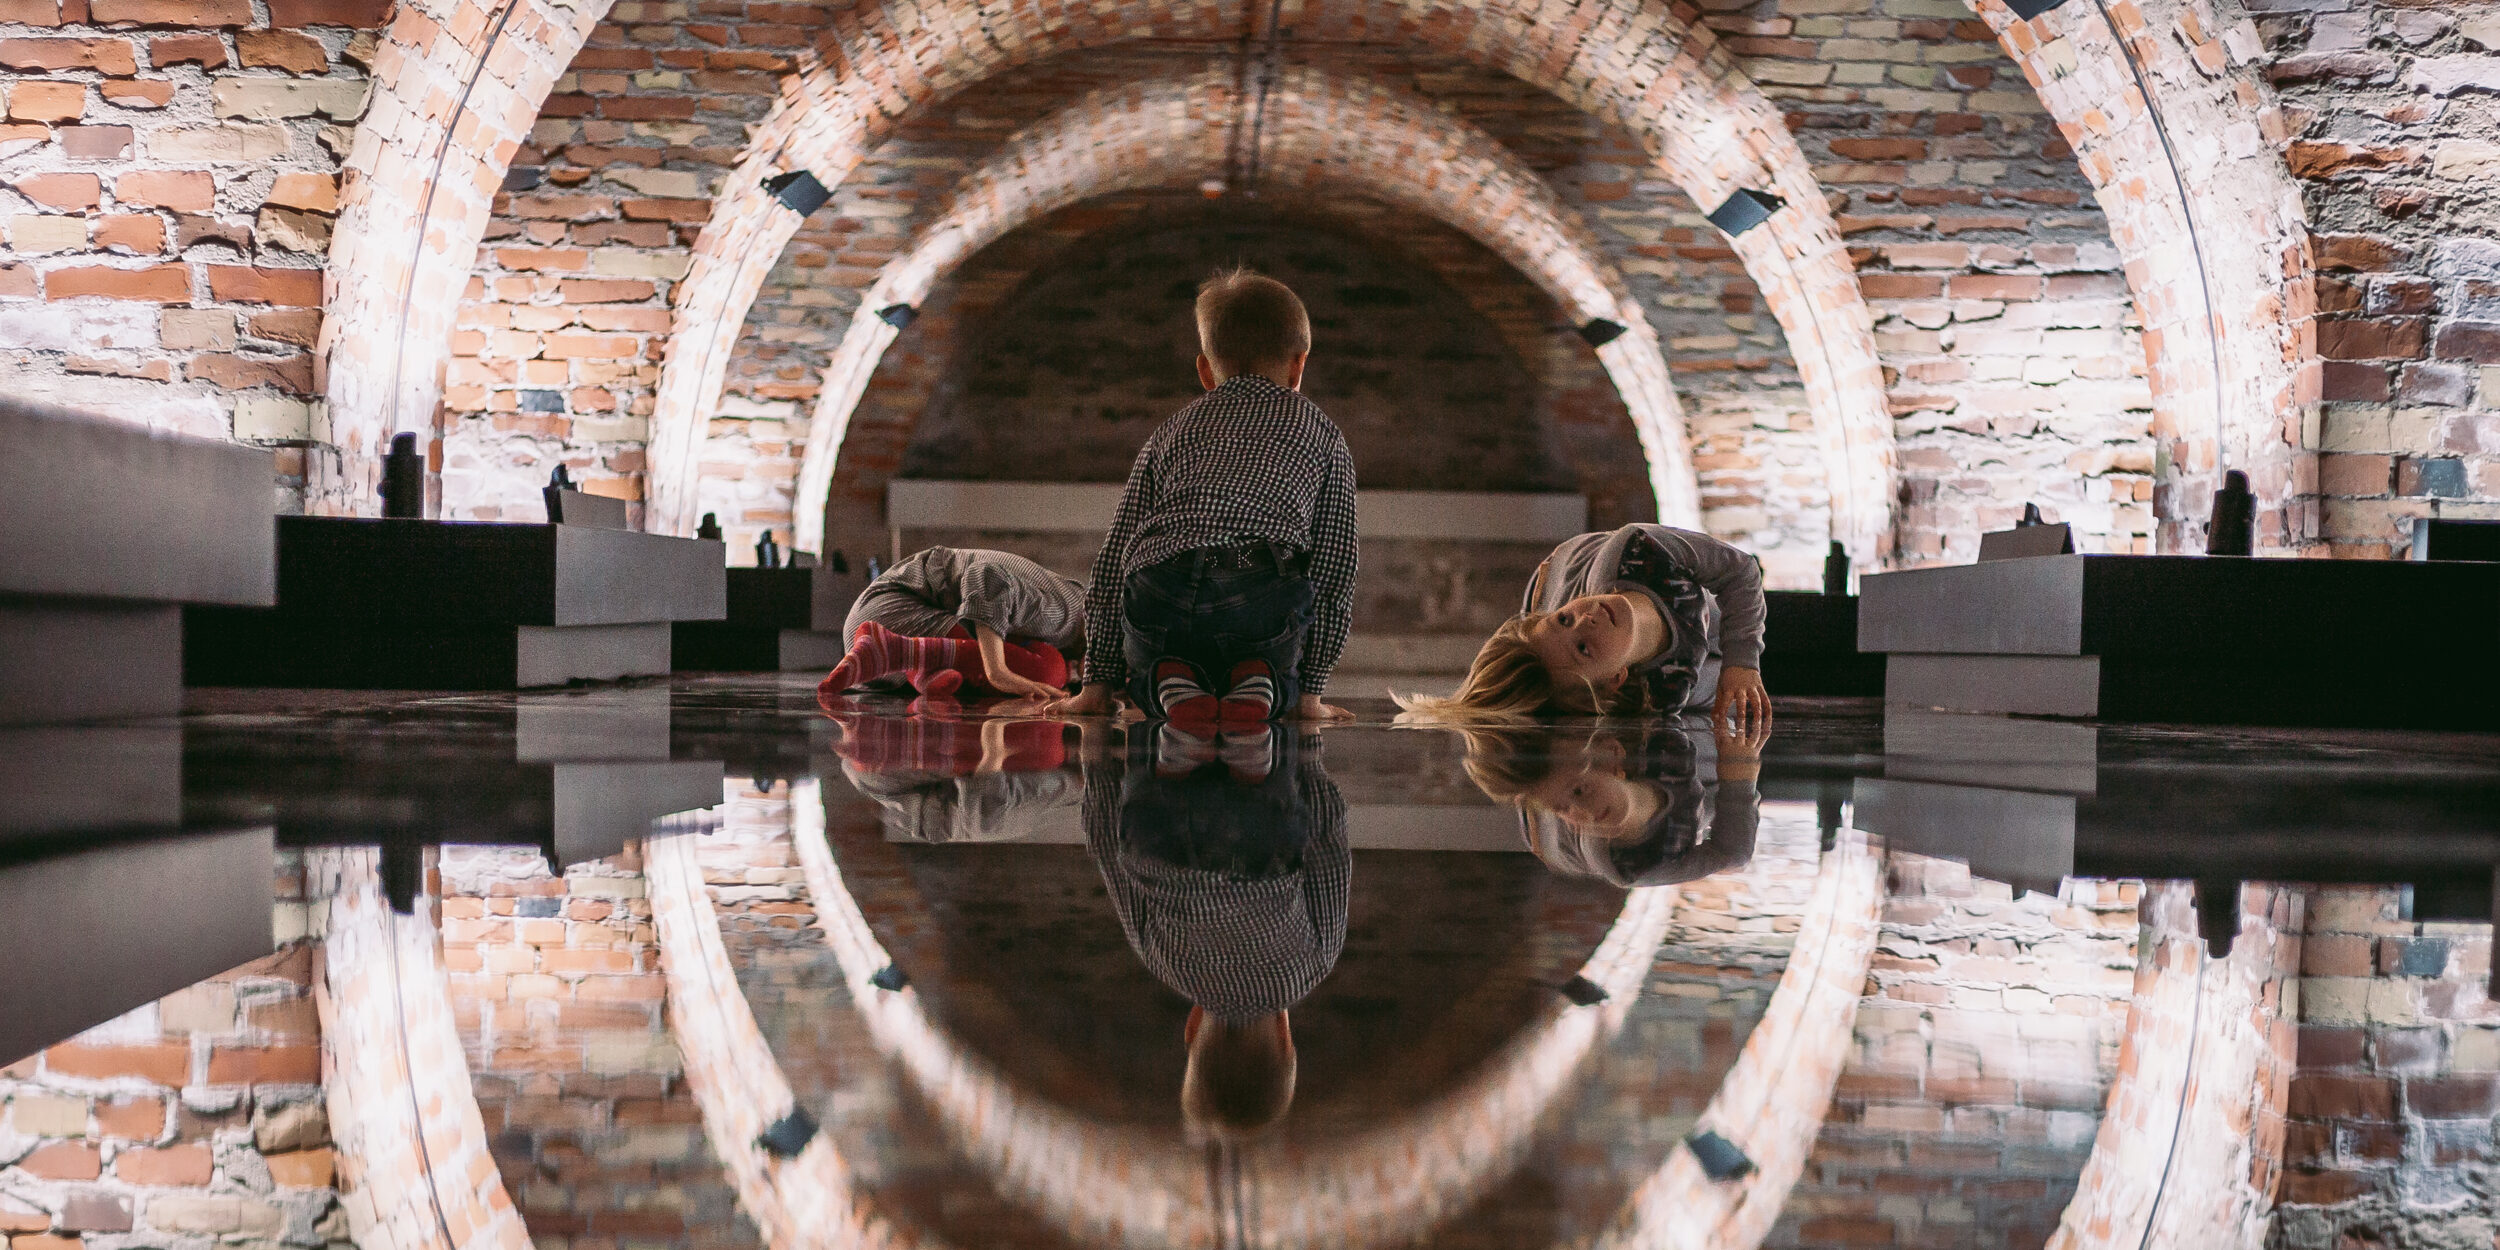 Kids playing on a mirrored floor